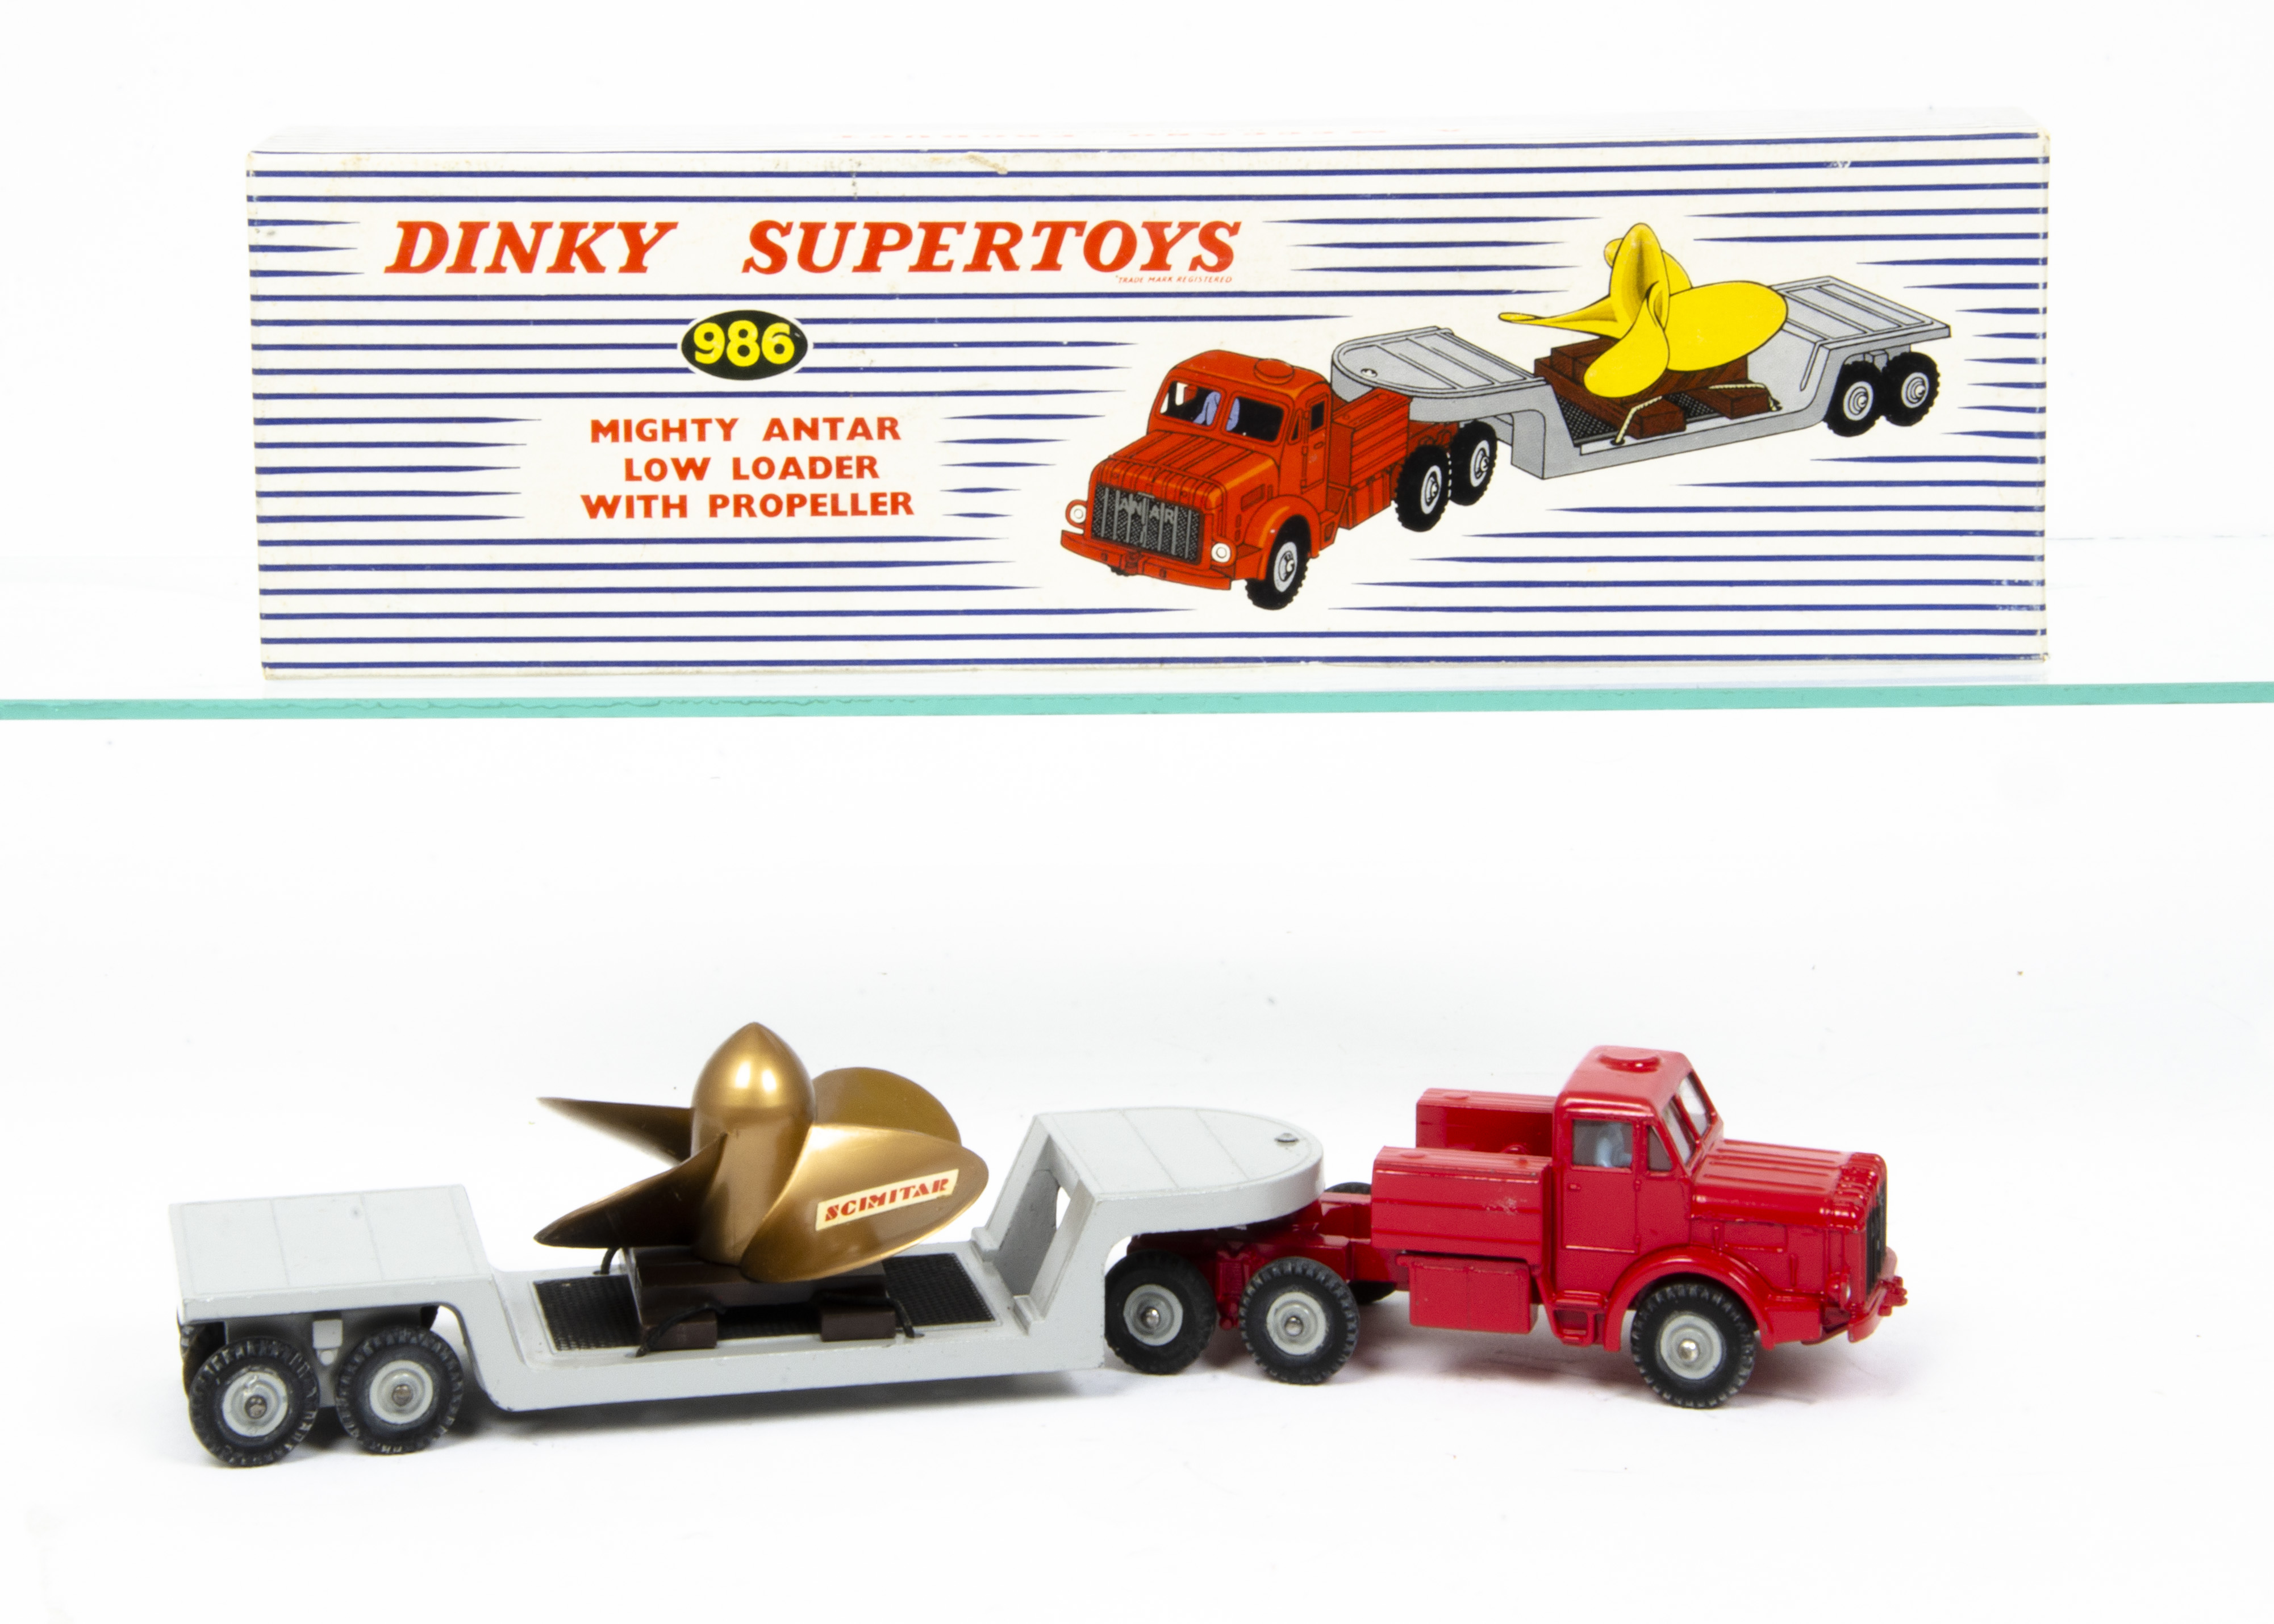 A Dinky Supertoys 986 Mighty Antar Low Loader With Propeller, red cab, blue driver, glazing, grey